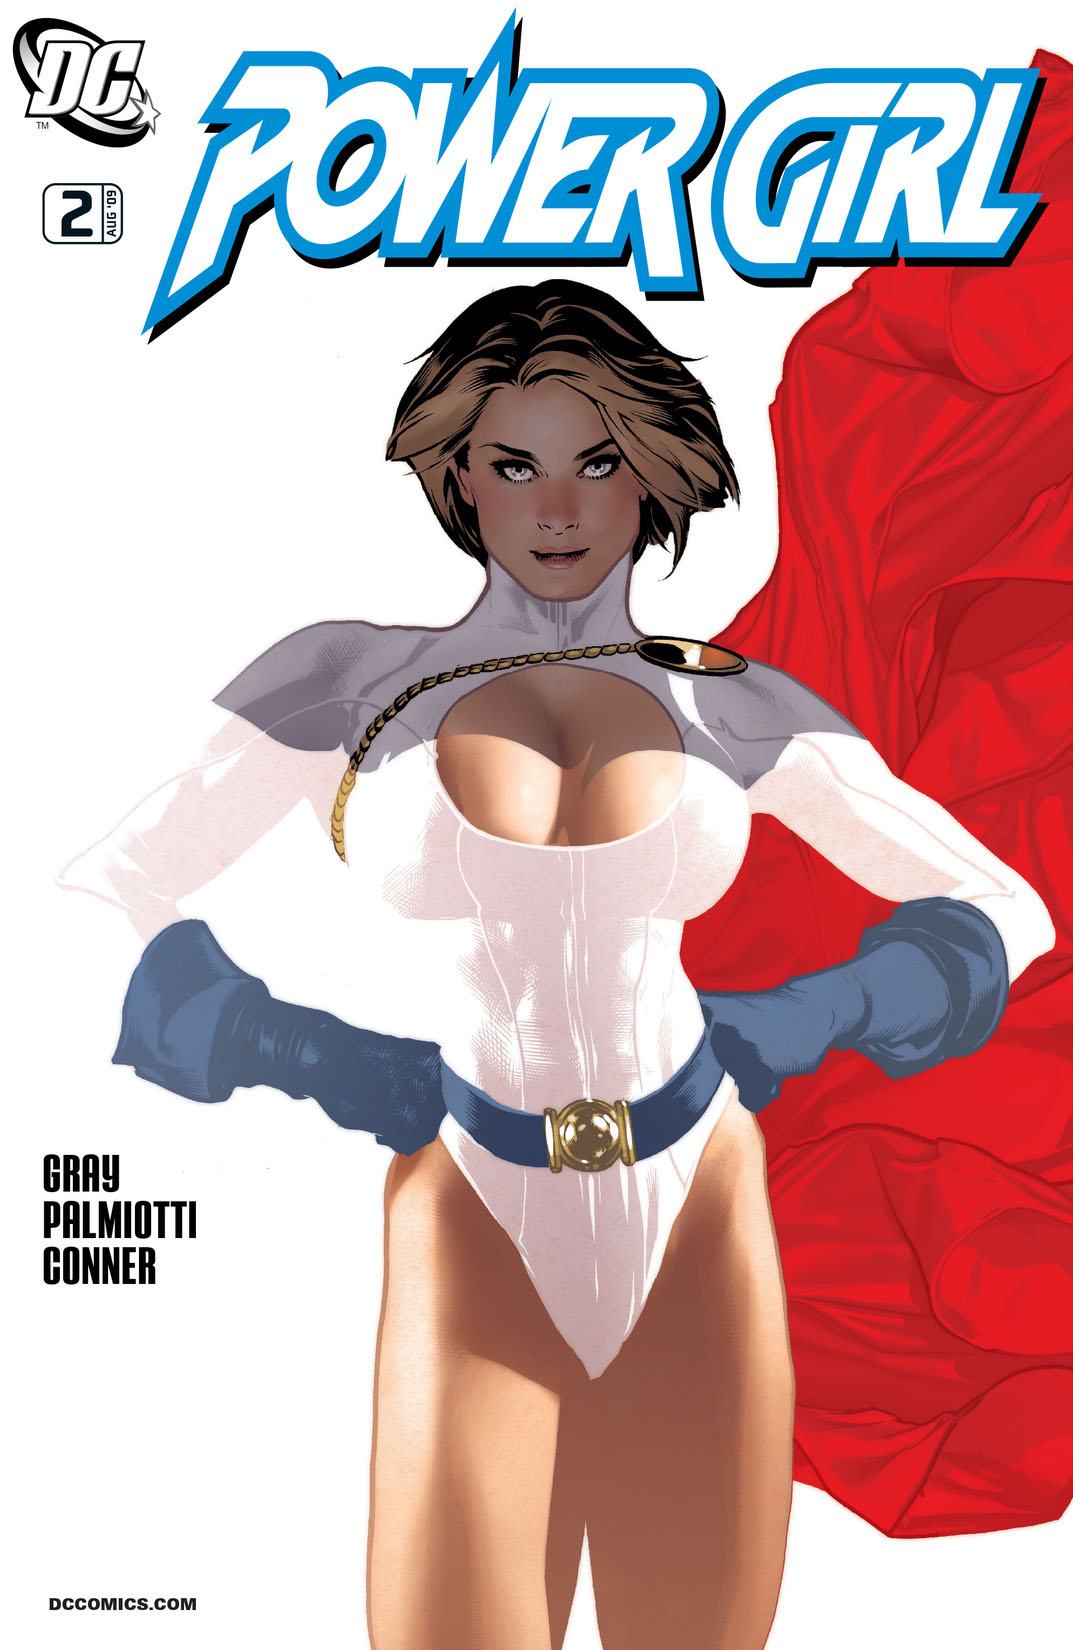 Power Girl (2009-) #2 preview images